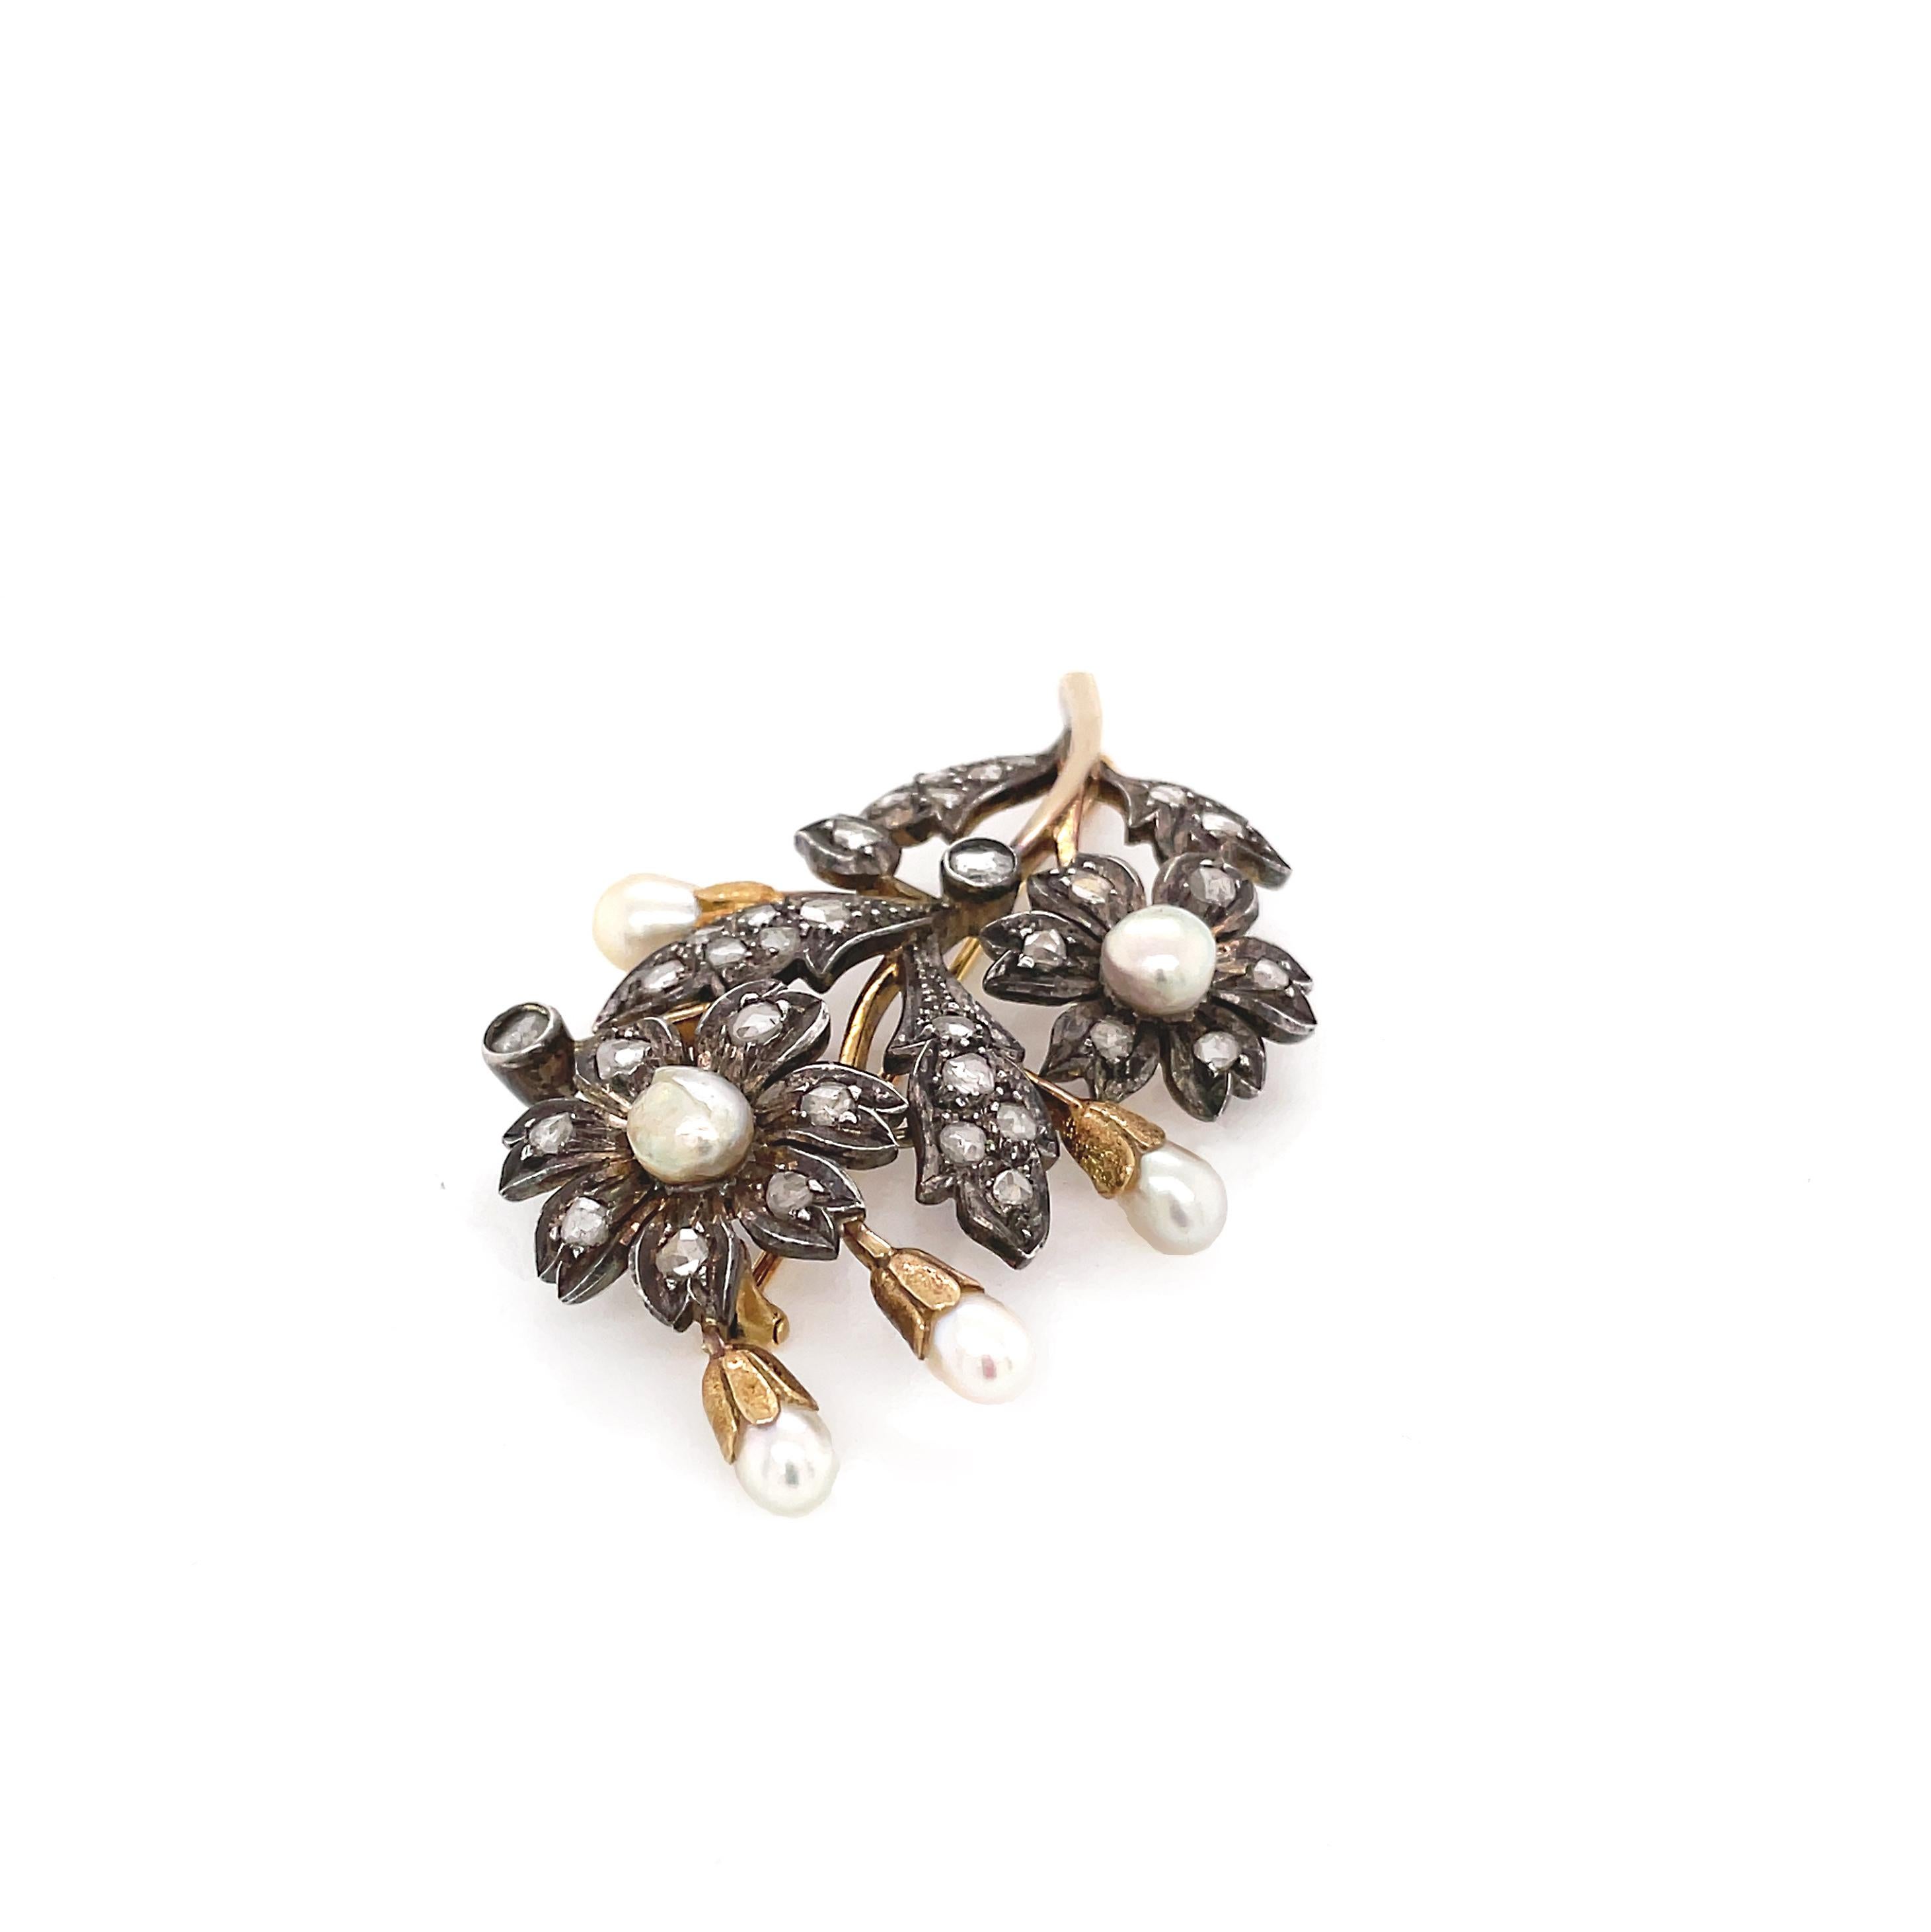 This gorgeous Victorian brooch has been crafted in silver on gold, typical of its period. The floral designed piece is beautifully set with 6 natural Saltwater pearls measuring between 4.2mm - 5.4mm, decorated with a cluster of approximately 2.00